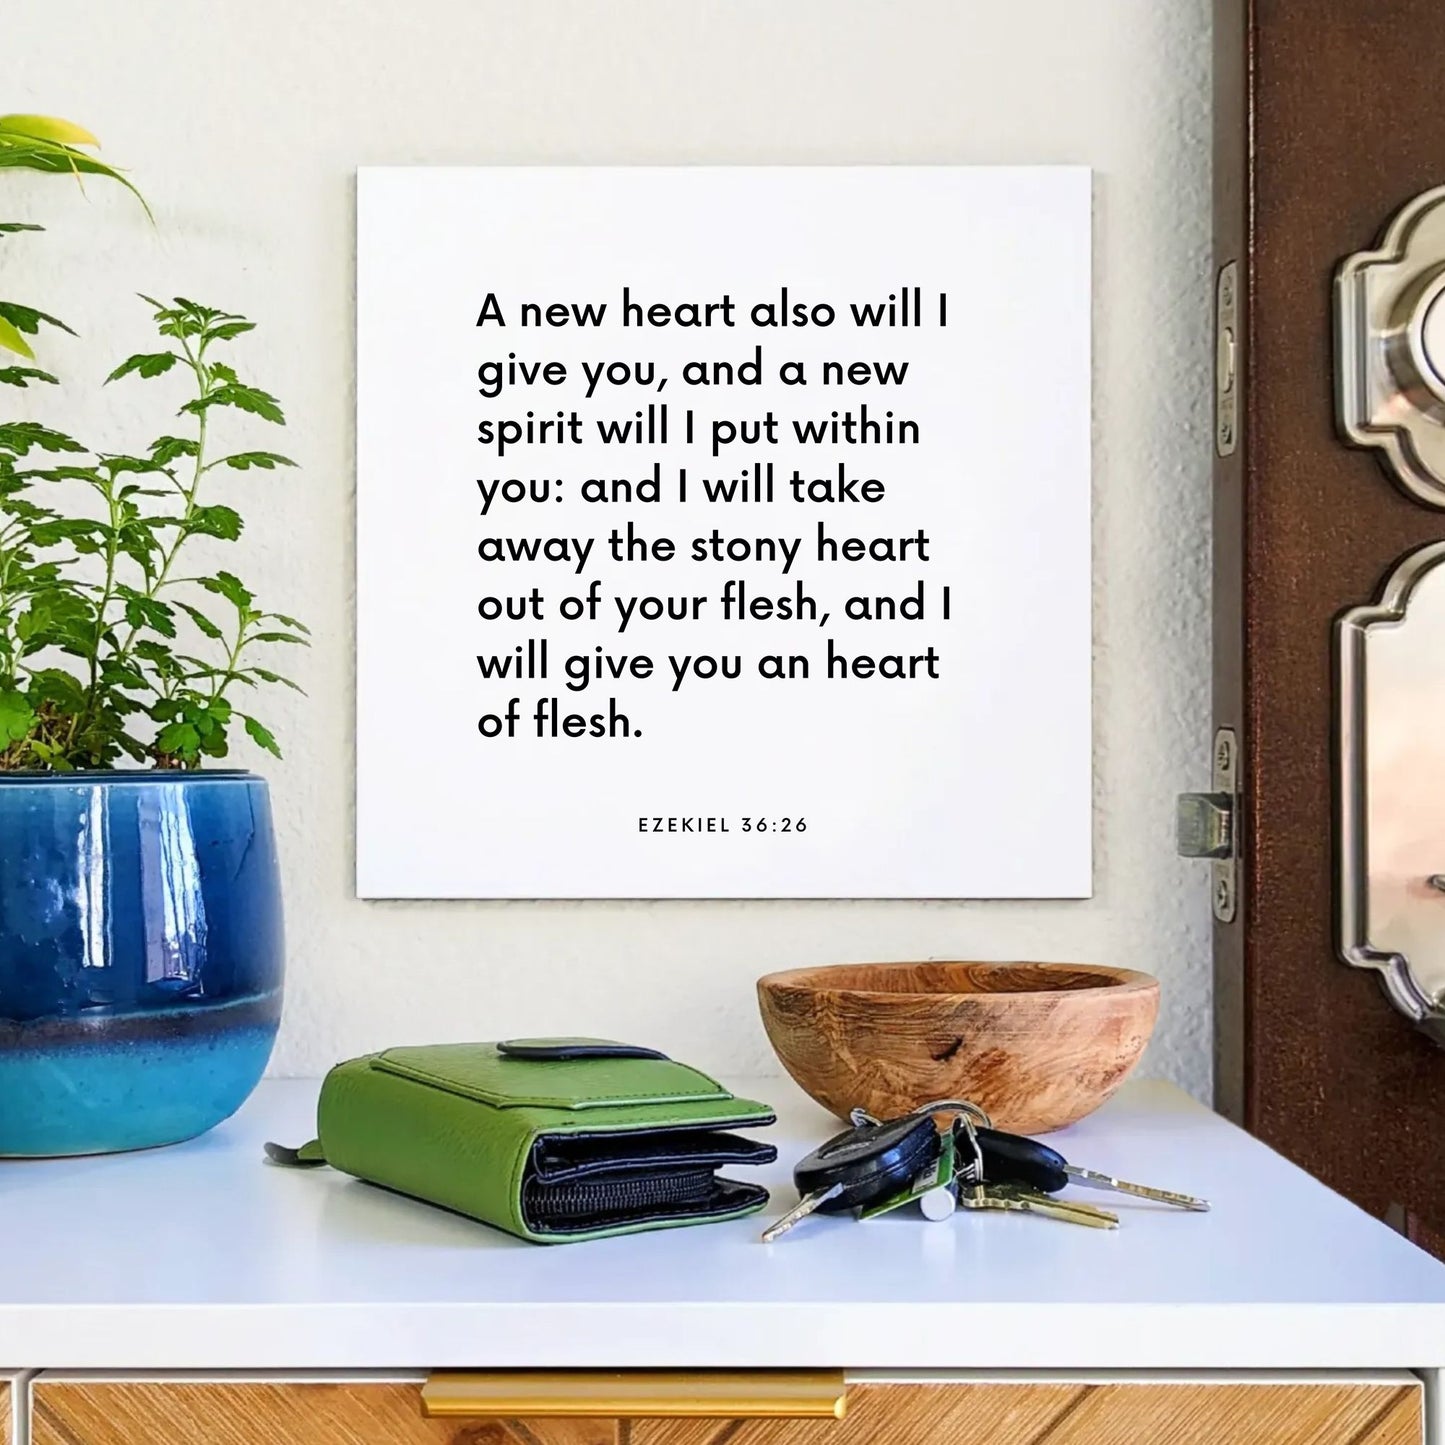 Entryway mouting of the scripture tile for Ezekiel 36:26 - "A new heart also will I give you, and a new spirit"